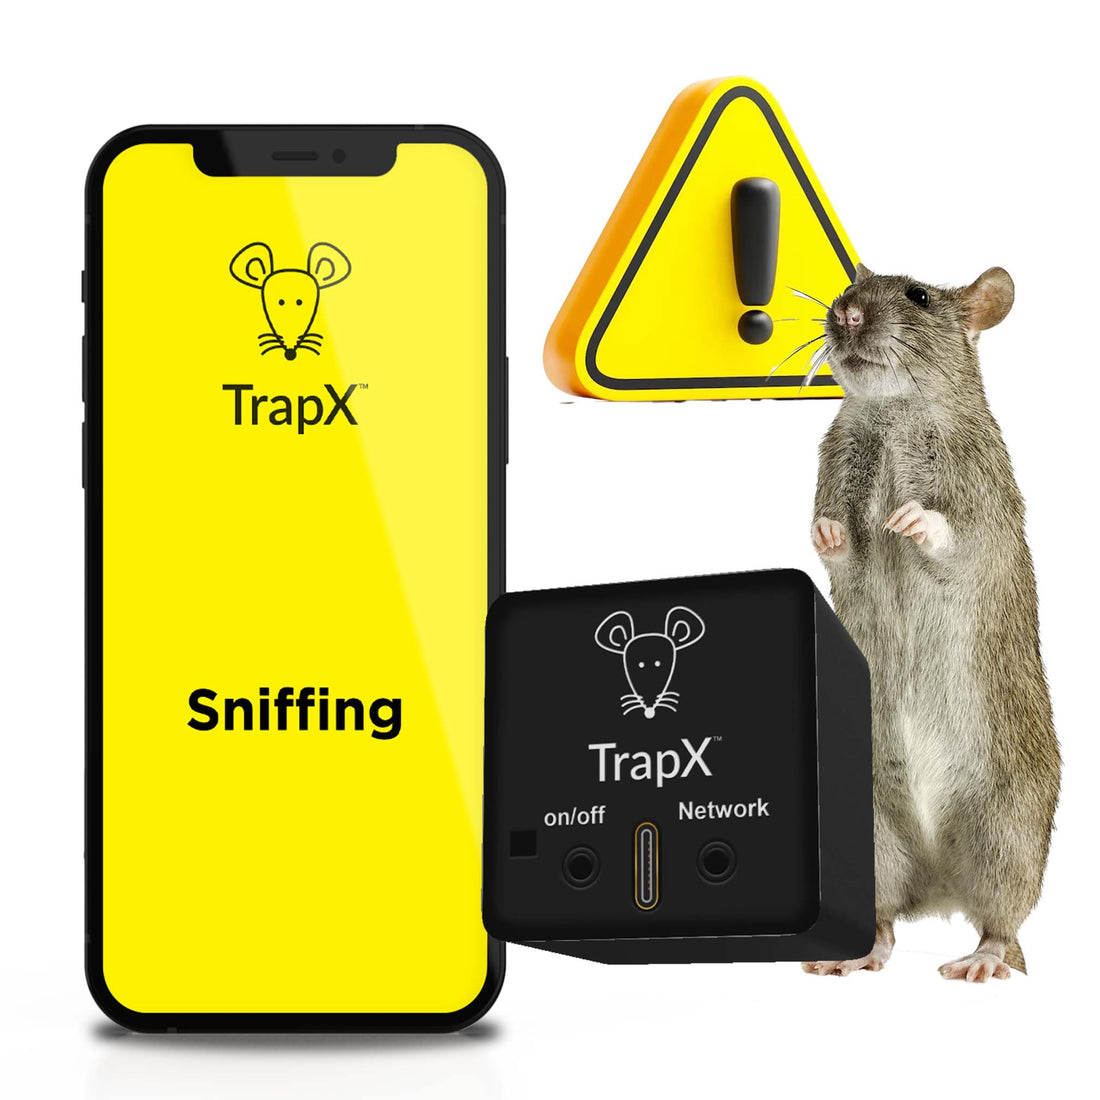 rodent monitoring system